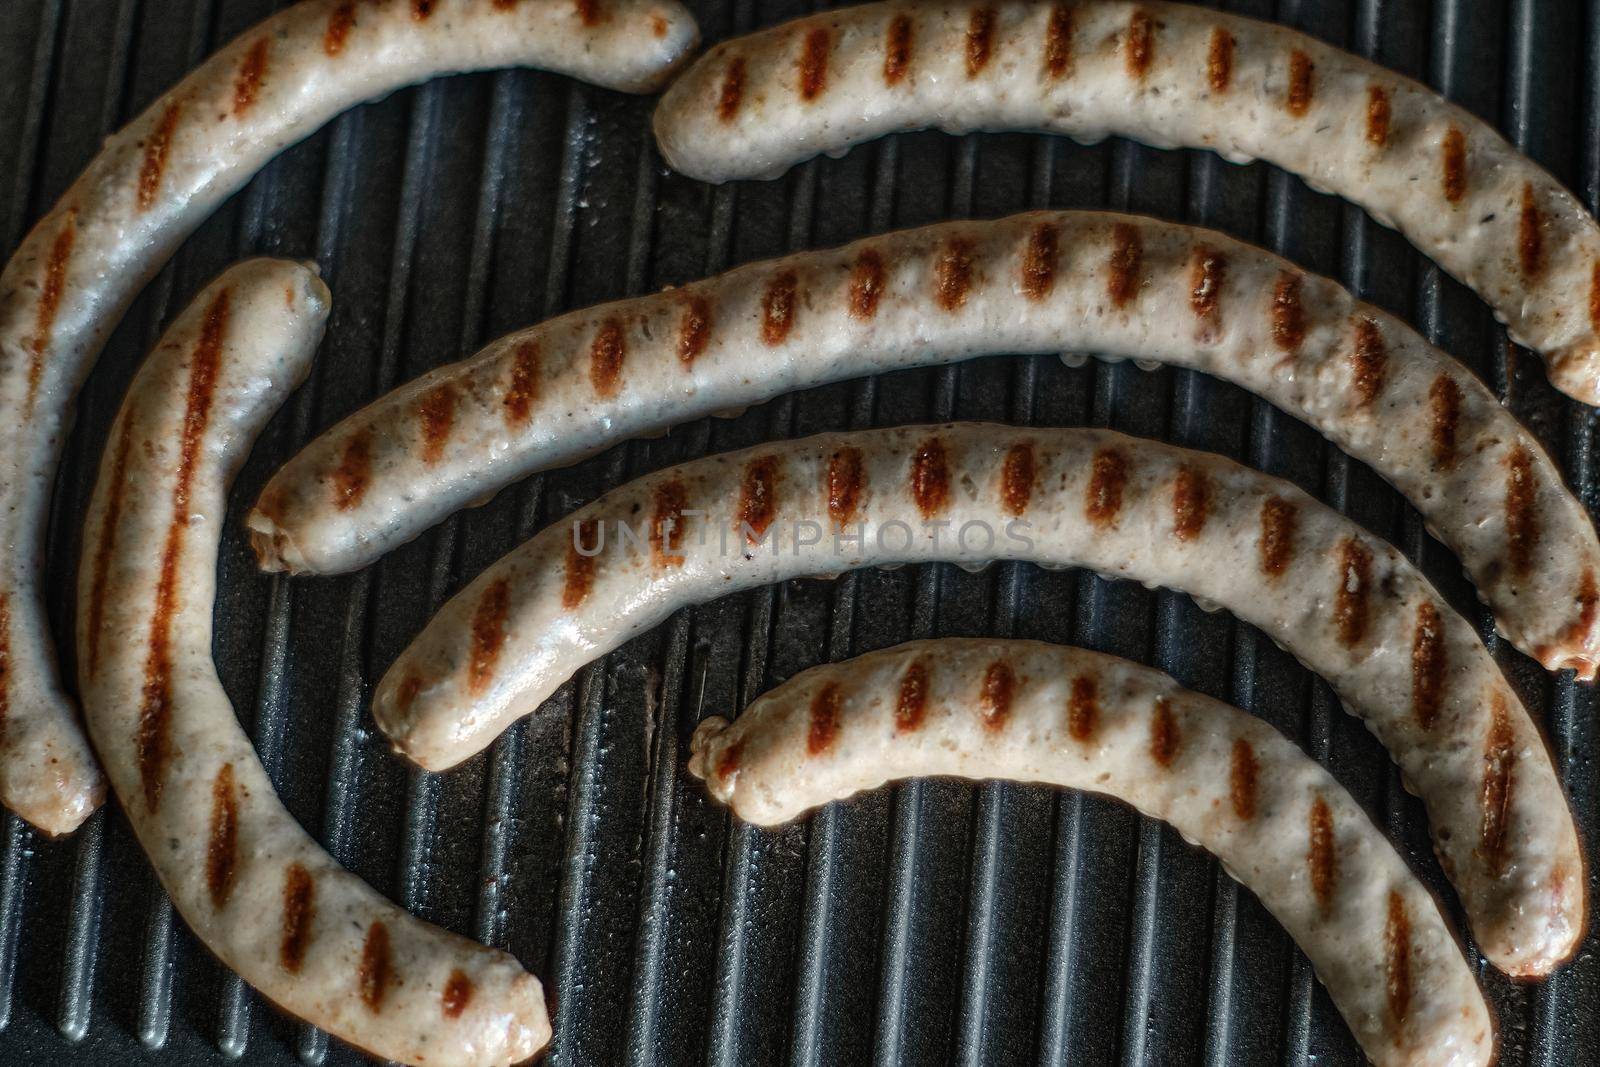 Grilled sausages are cooked, close up shot